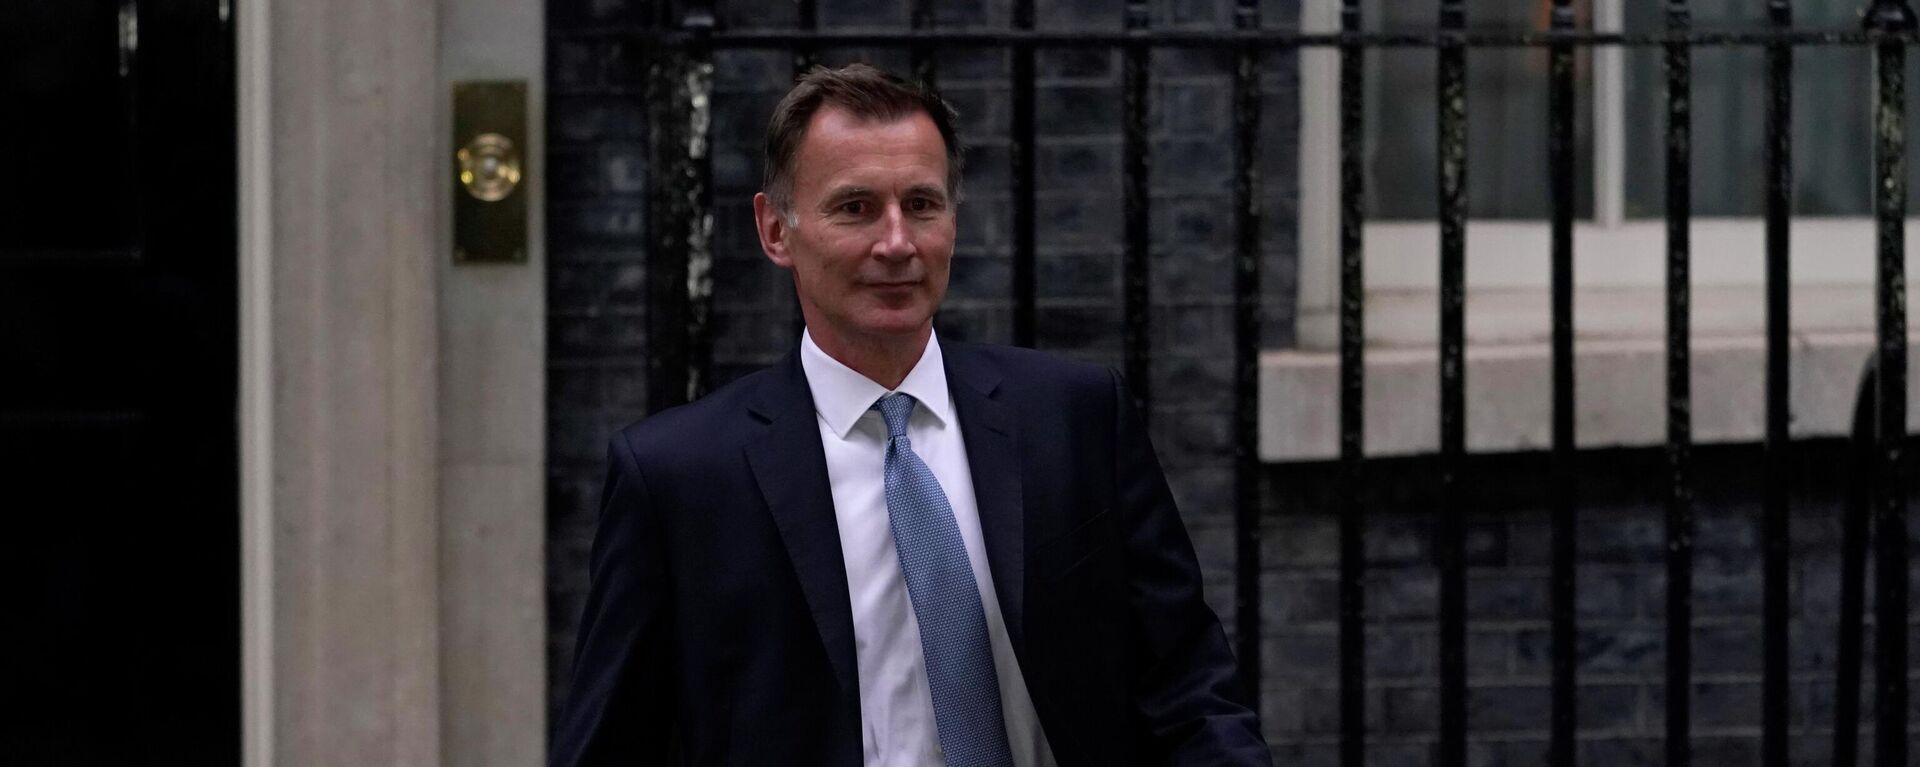 British Chancellor of the Exchequer Jeremy Hunt leaves 10 Downing Street after being appointed by Prime Minister Liz Truss - Sputnik International, 1920, 17.10.2022